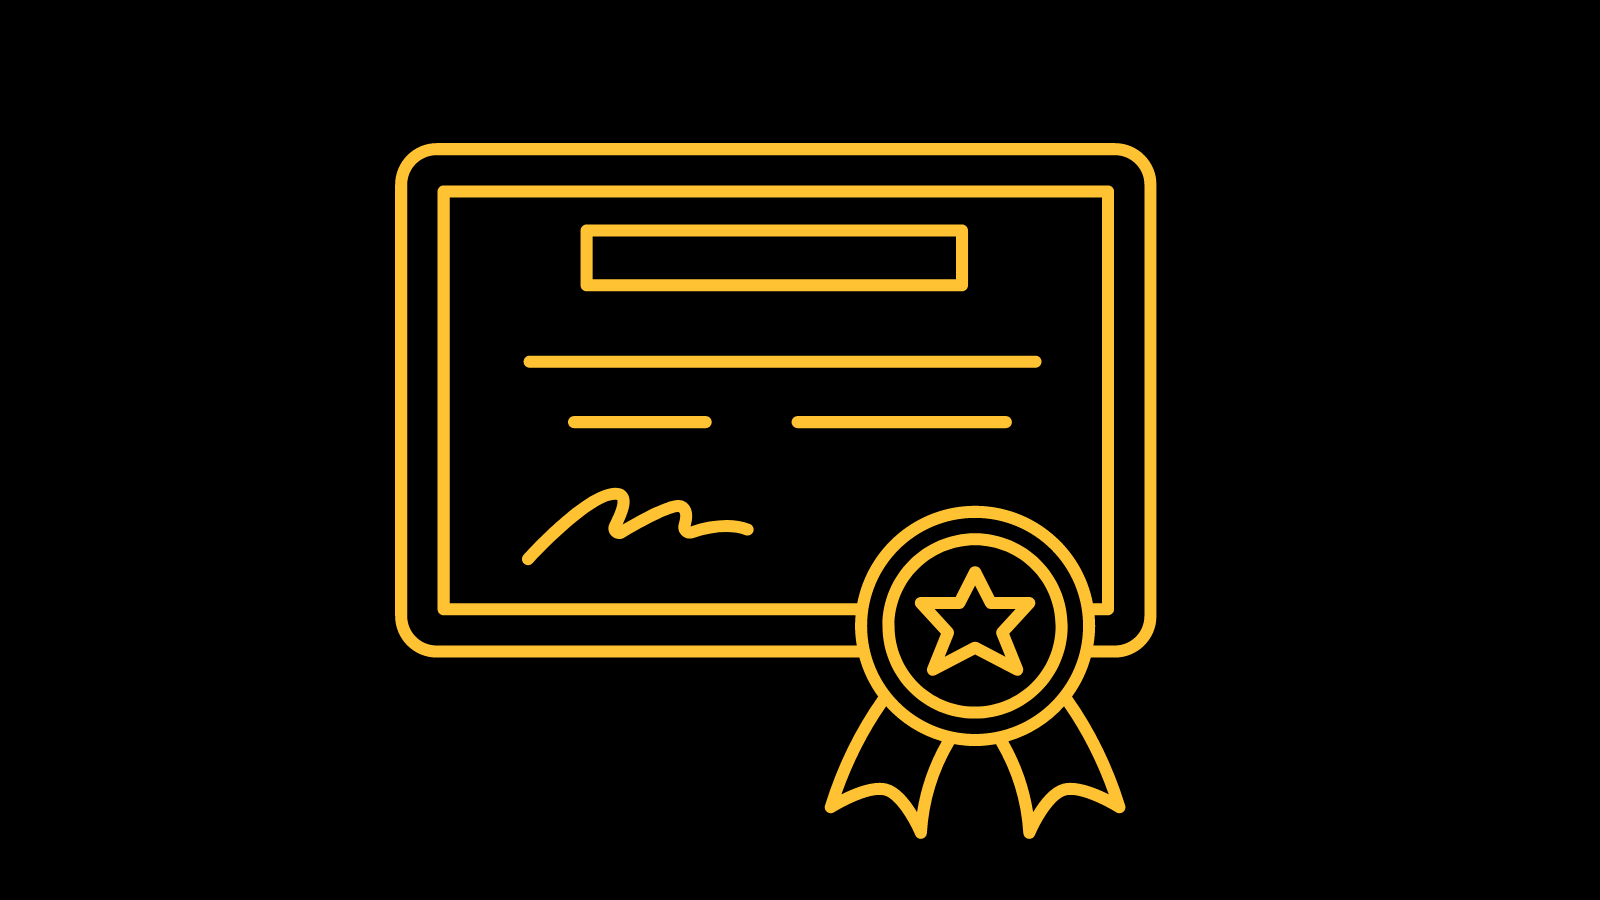 A basic graphic of a certificate